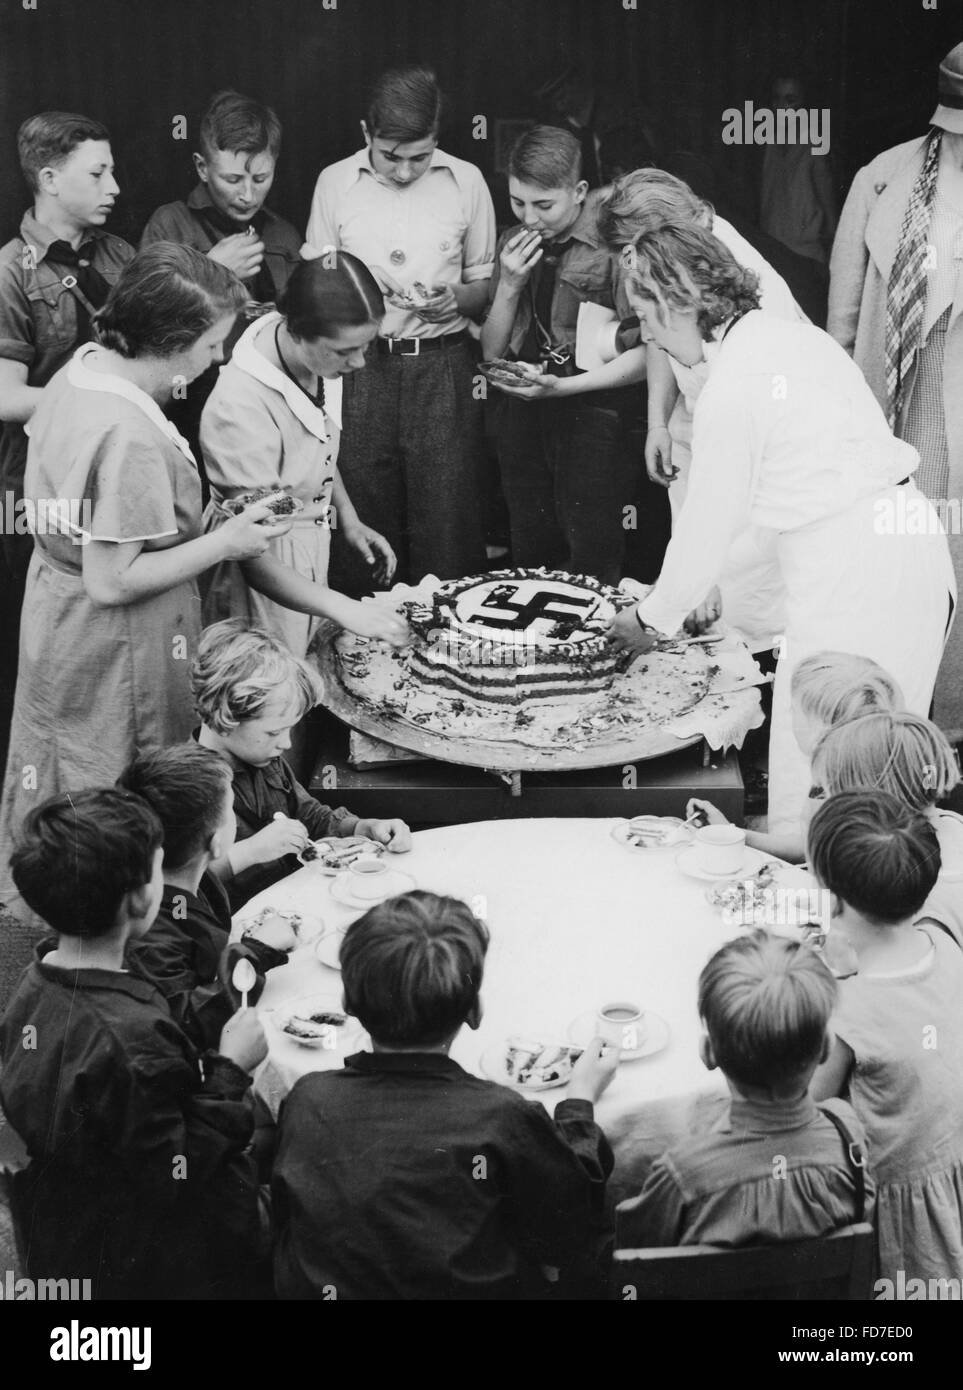 Hitler's birthday cake is being shared, 1934 Stock Photo